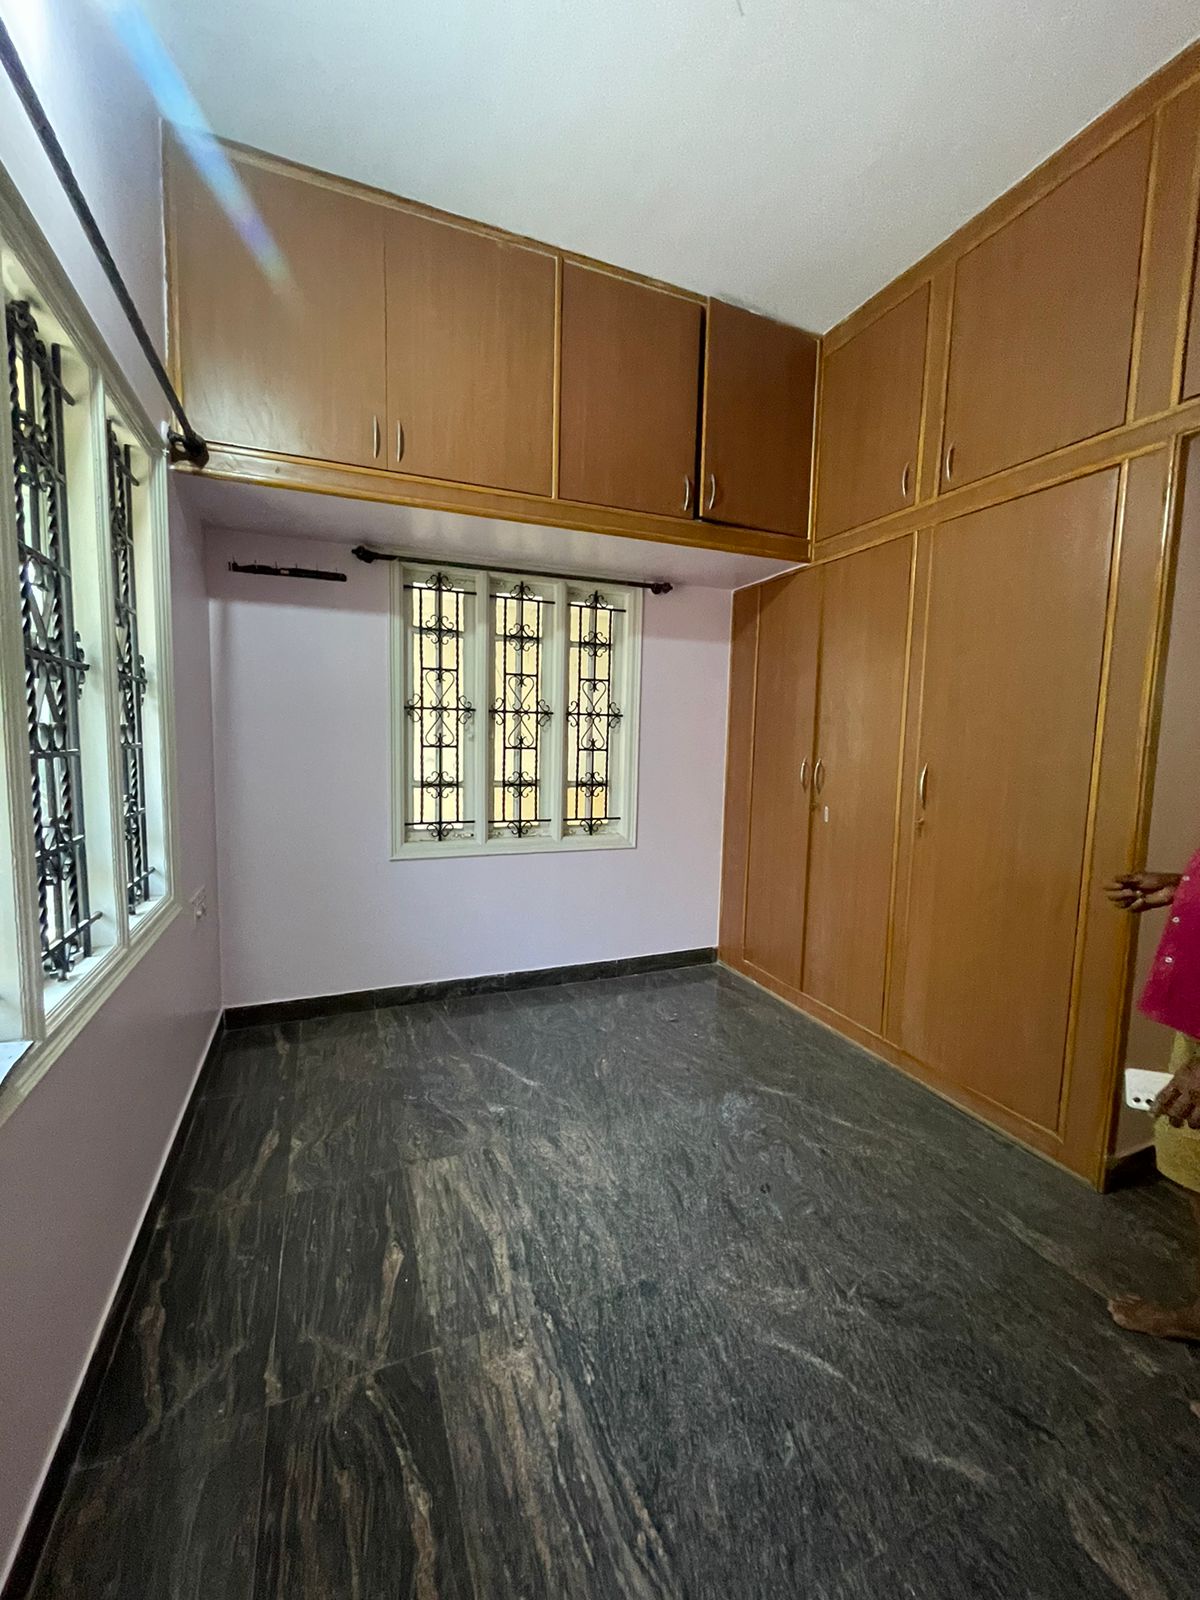 3 BHK Independent House for Lease Only at JAML2 - 4251 in Benson Town